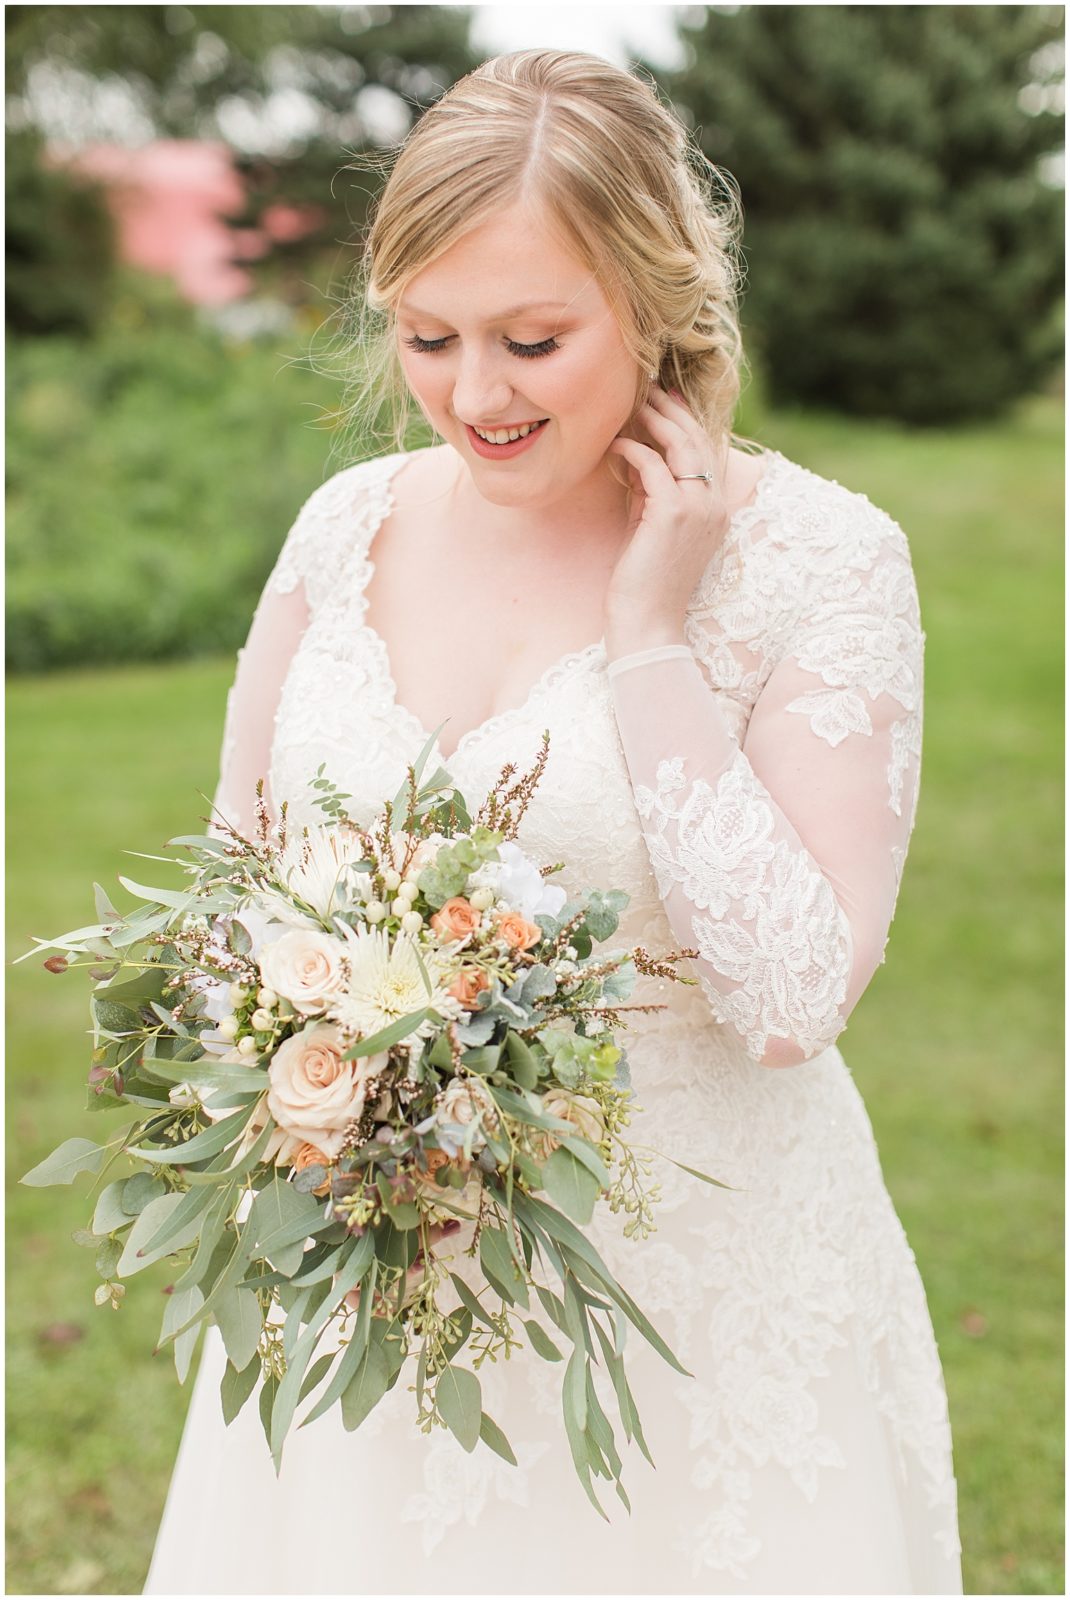 Bride Getting Ready | Wedding in Cherokee, Iowa shot by Jessica Brees Photography